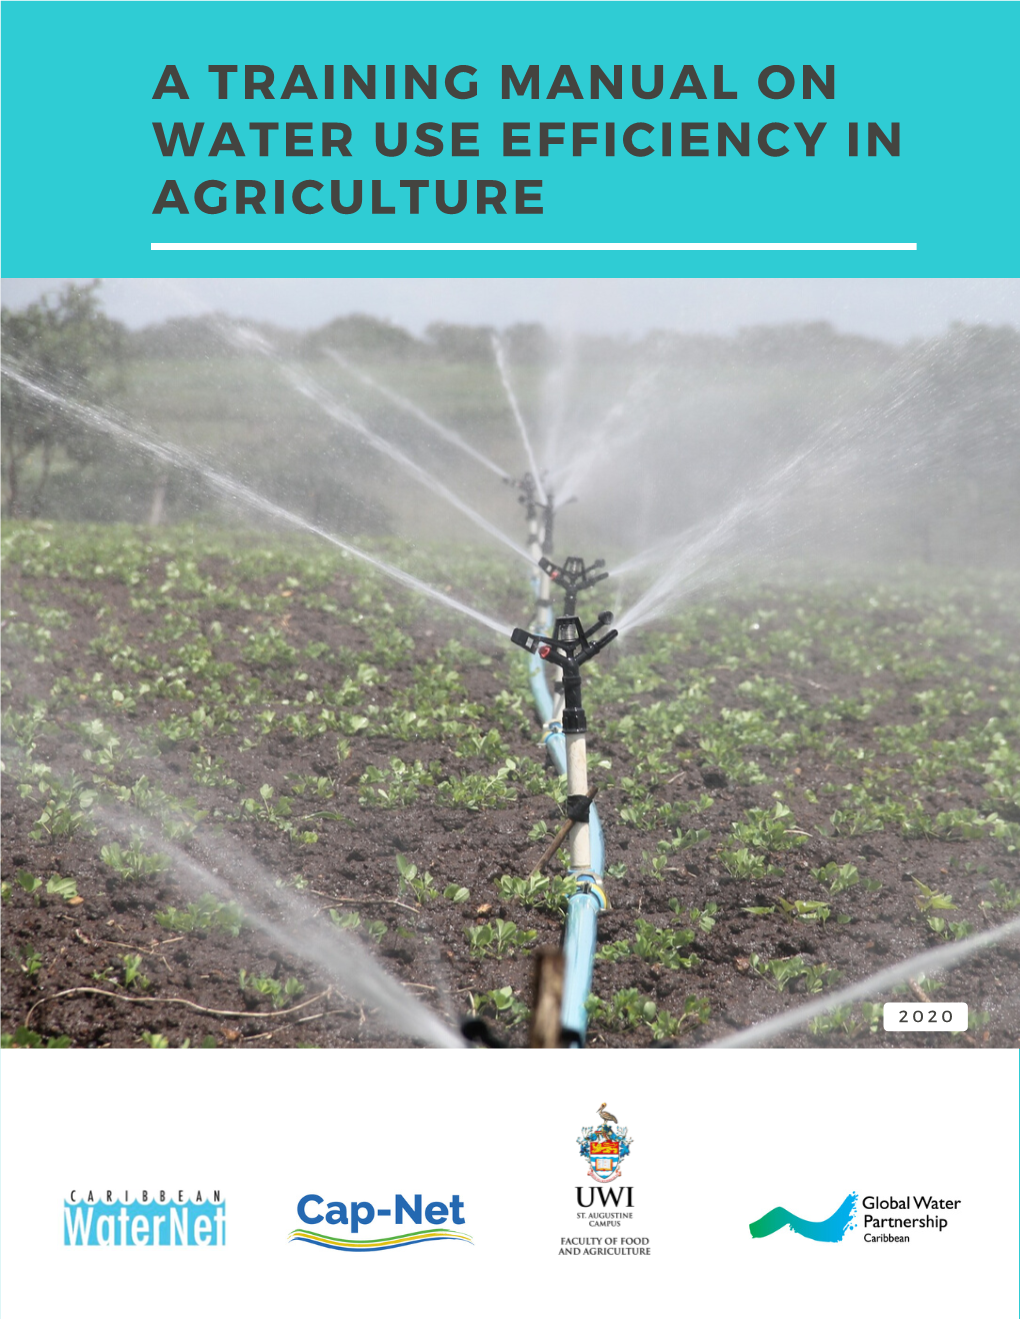 A Training Manual on Water Use Efficiency in Agriculture